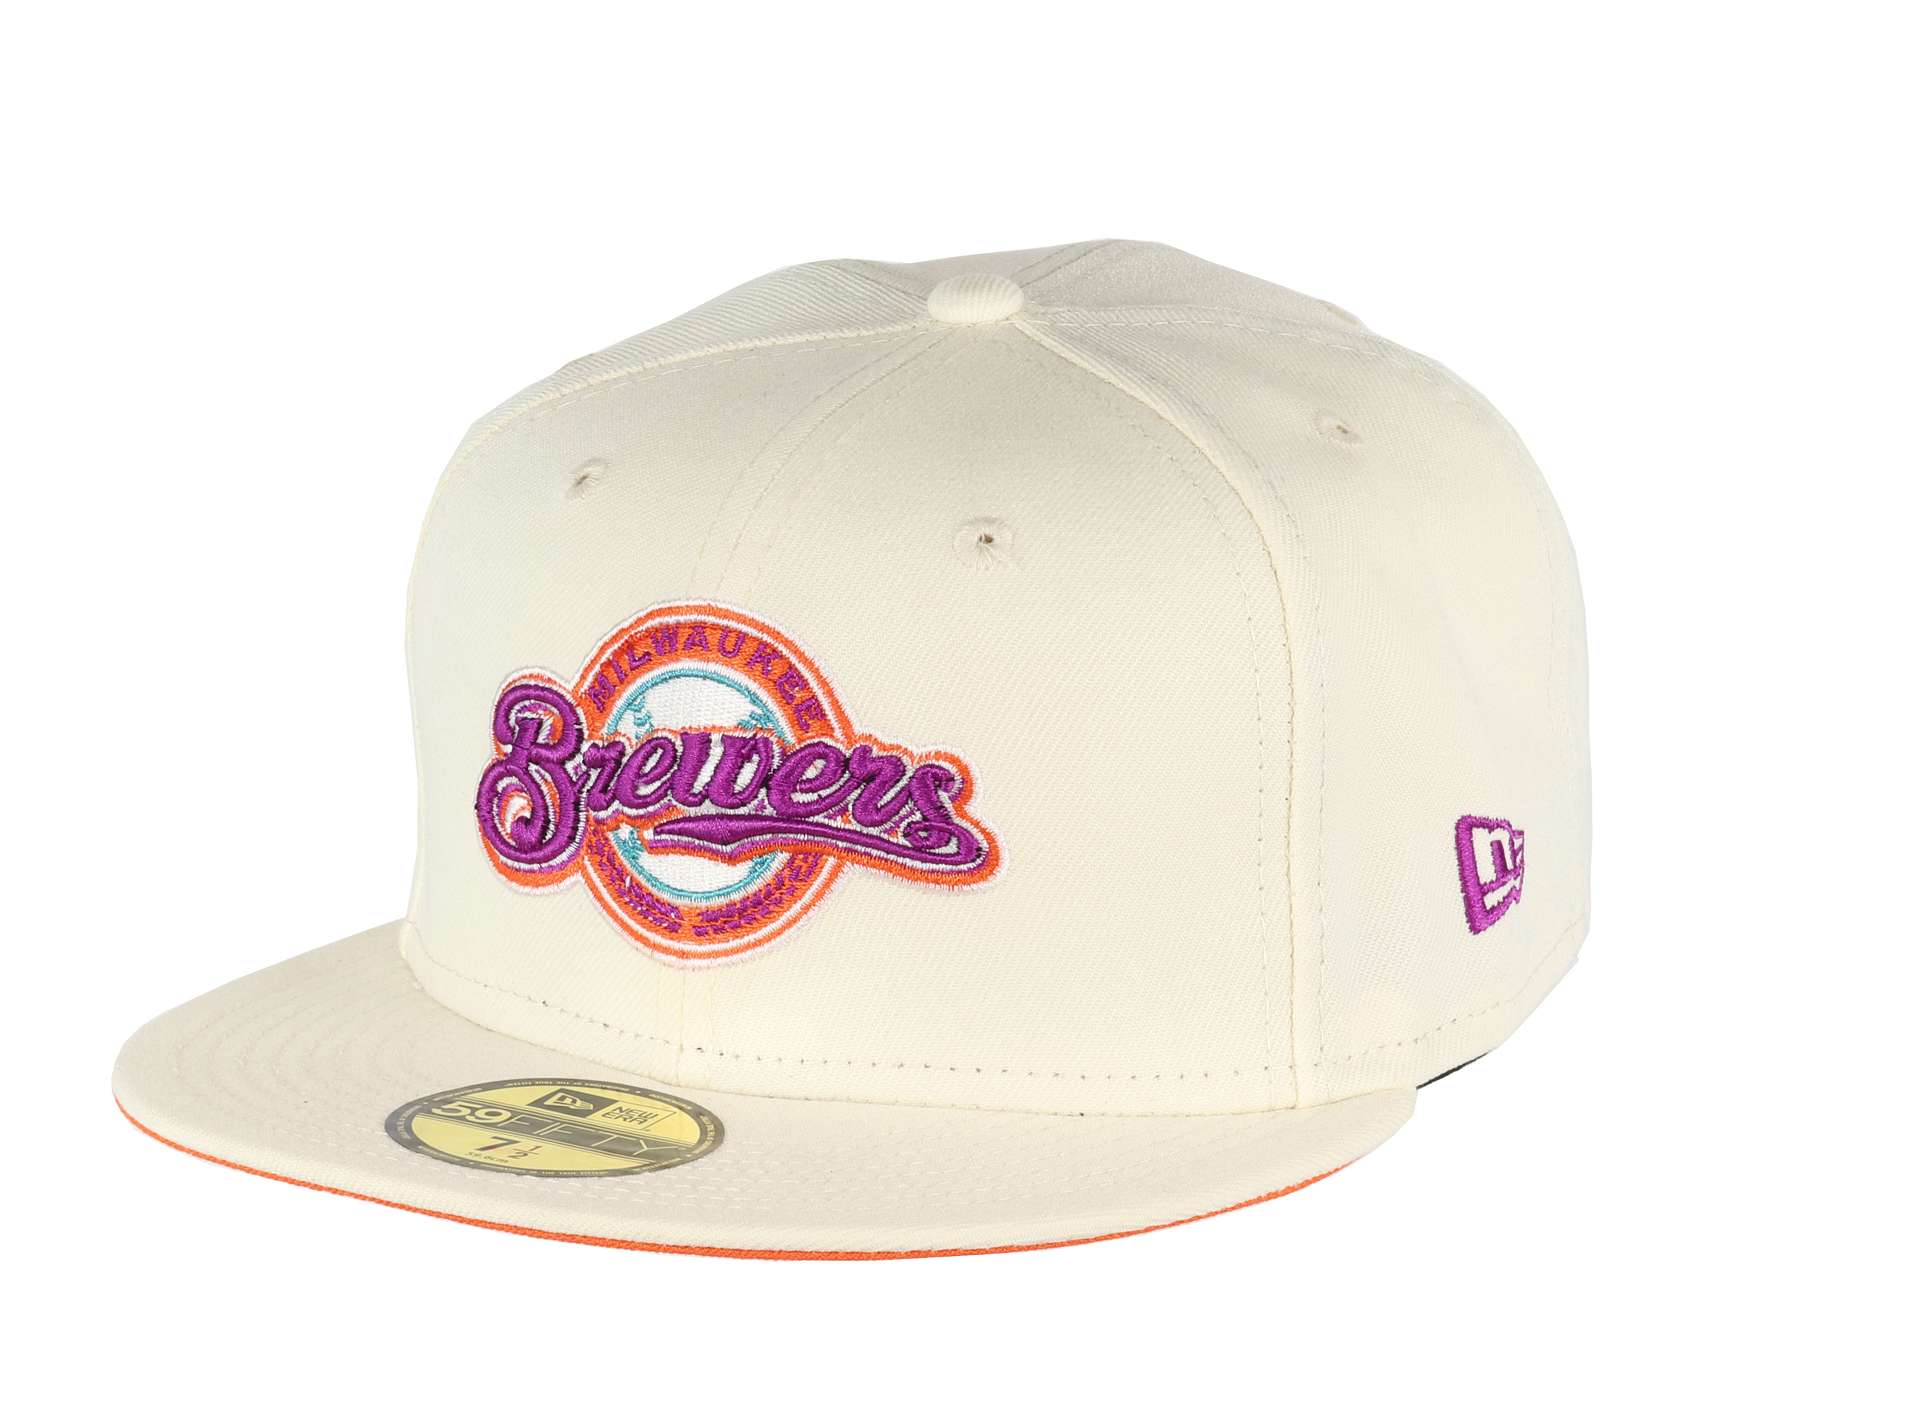 Milwaukee Brewers MLB Cooperstown County Stadium Sidepatch Chrome 59Fifty Basecap New Era